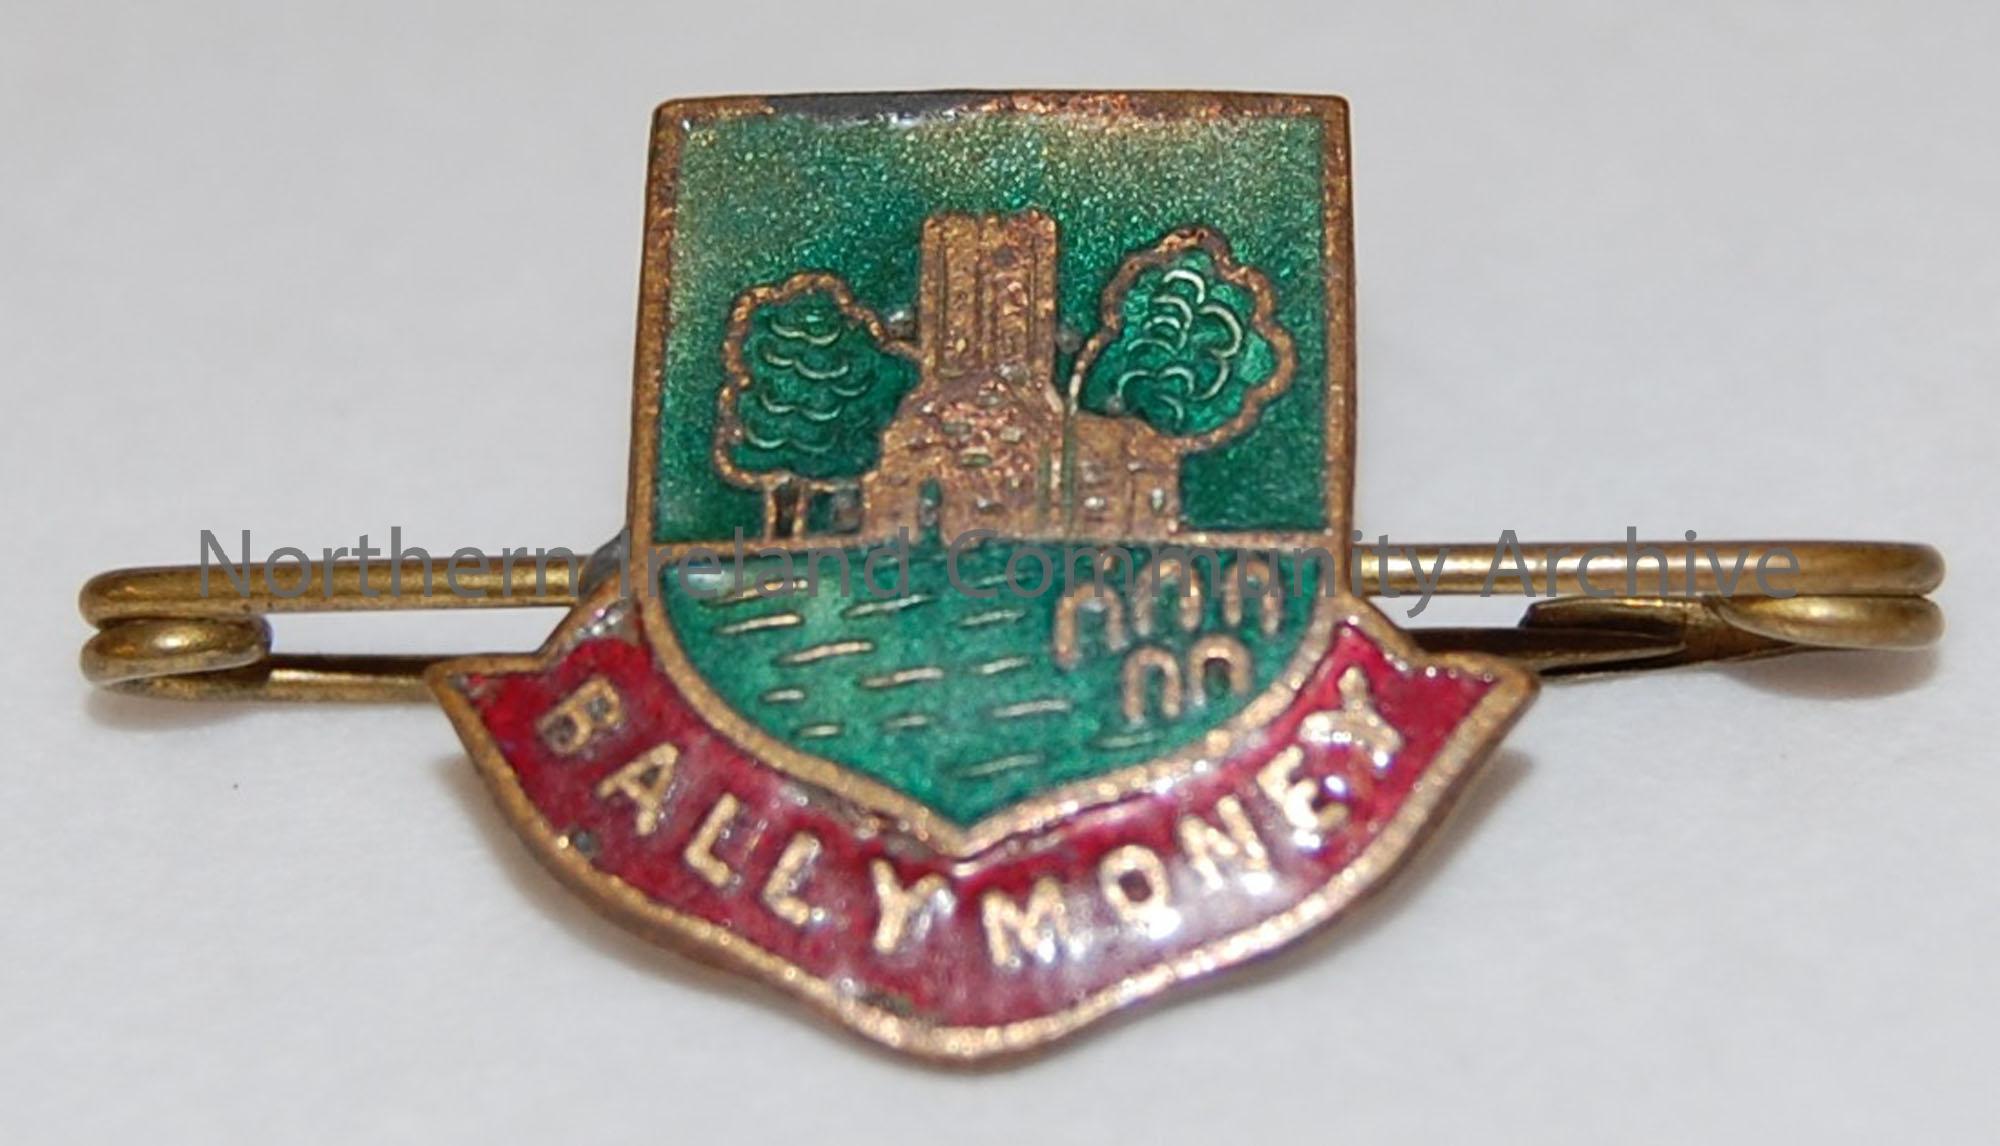 Souvenir badge of Ballymoney with image of the Old Church Tower and graveyard.